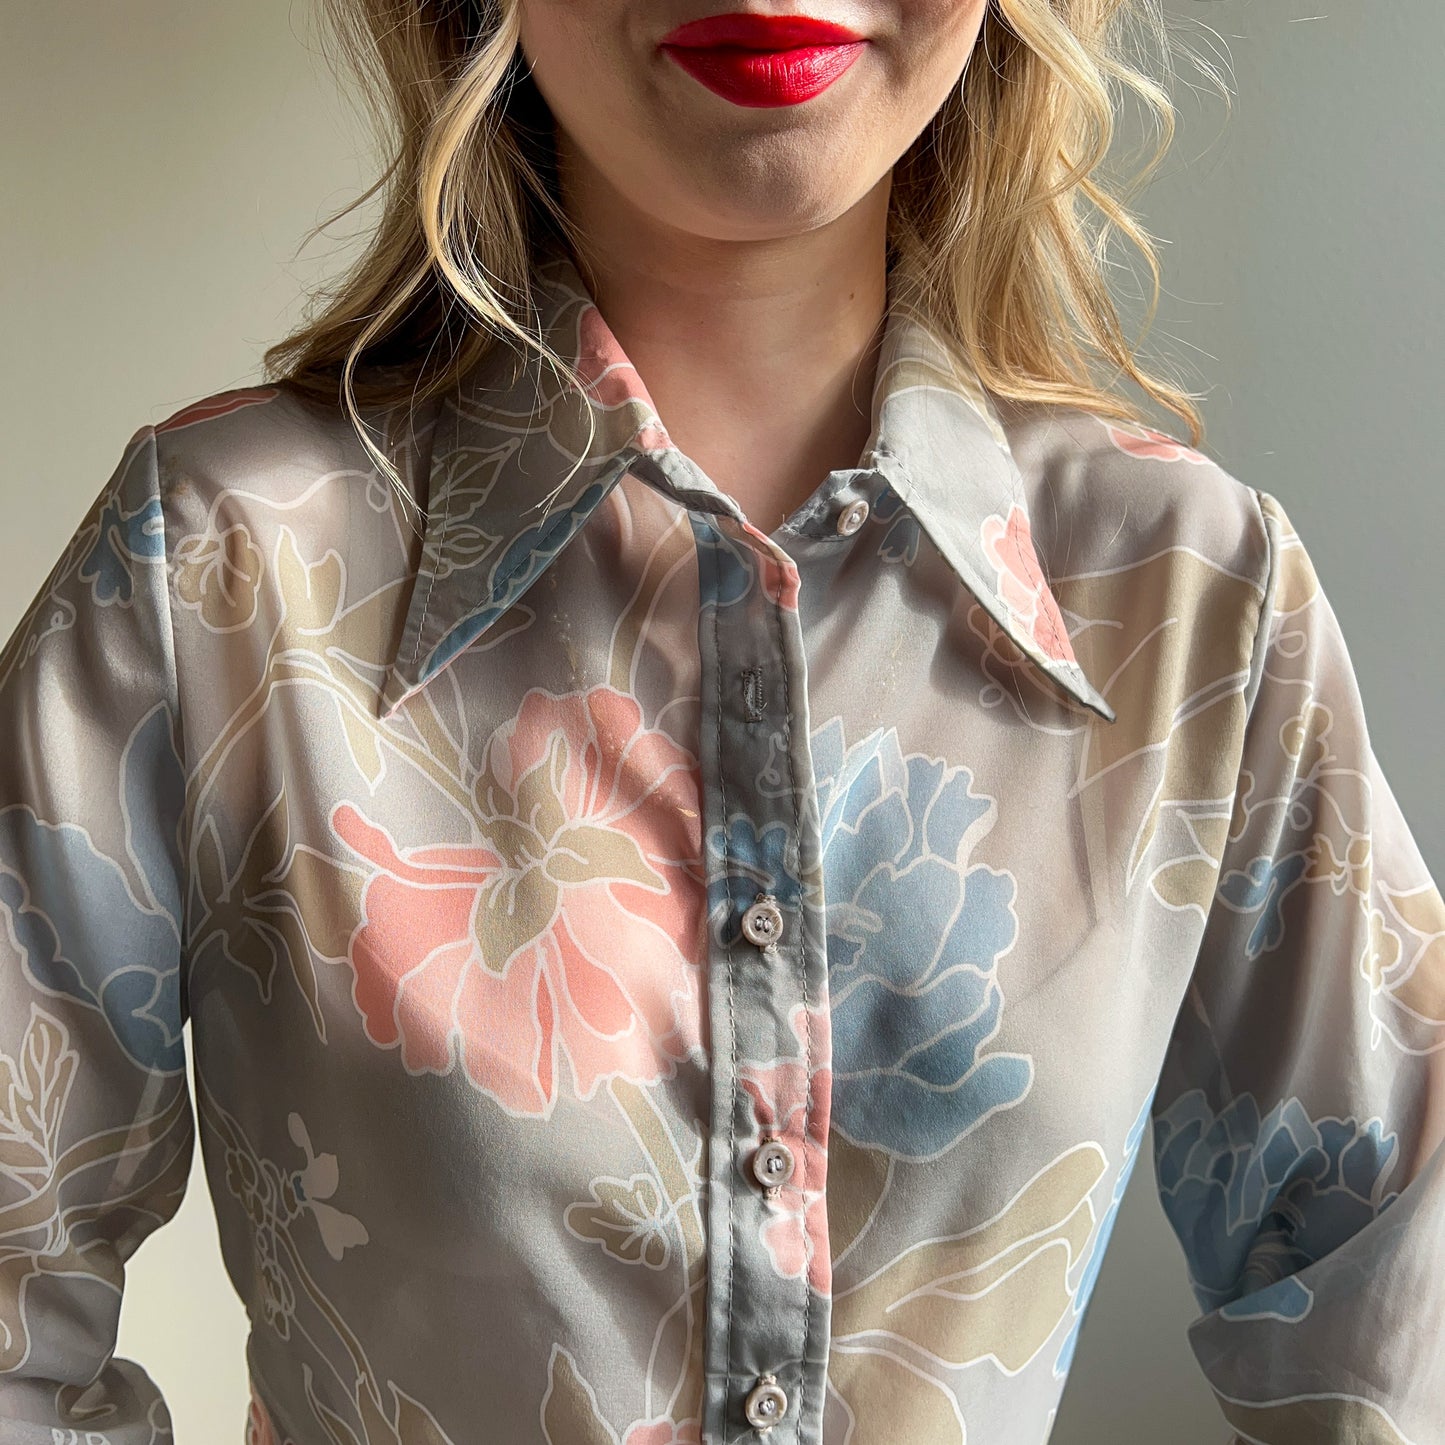 1970s Gray Sheer Blouse with Pink and Blue Florals (M/L)